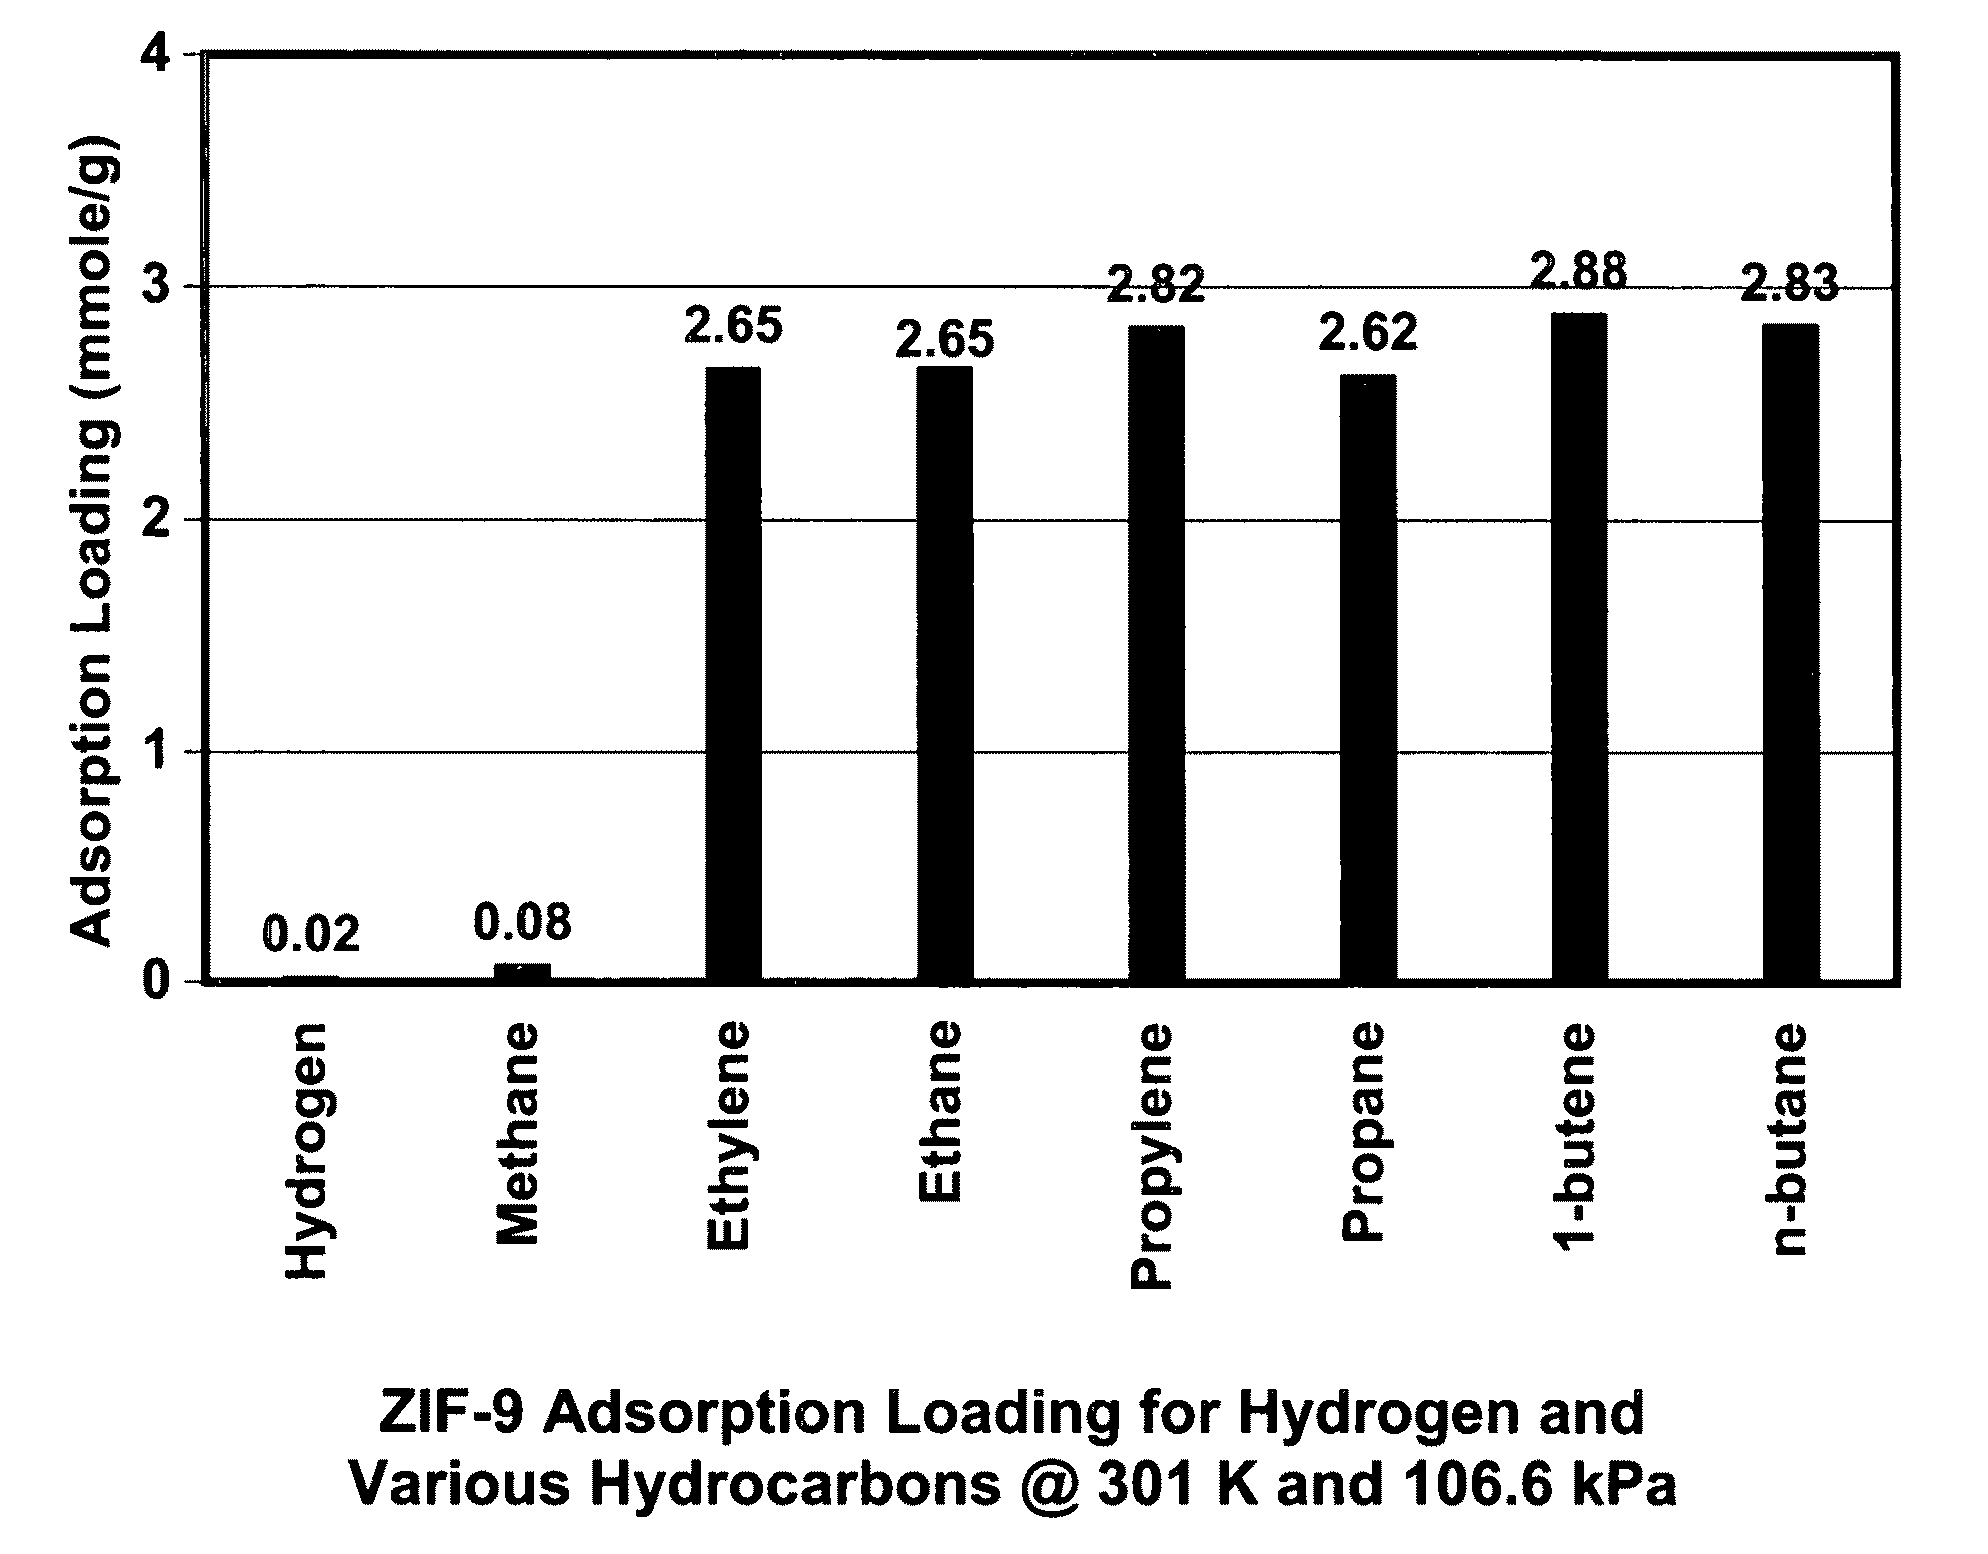 Separation of hydrogen from hydrocarbons utilizing zeolitic imidazolate framework materials